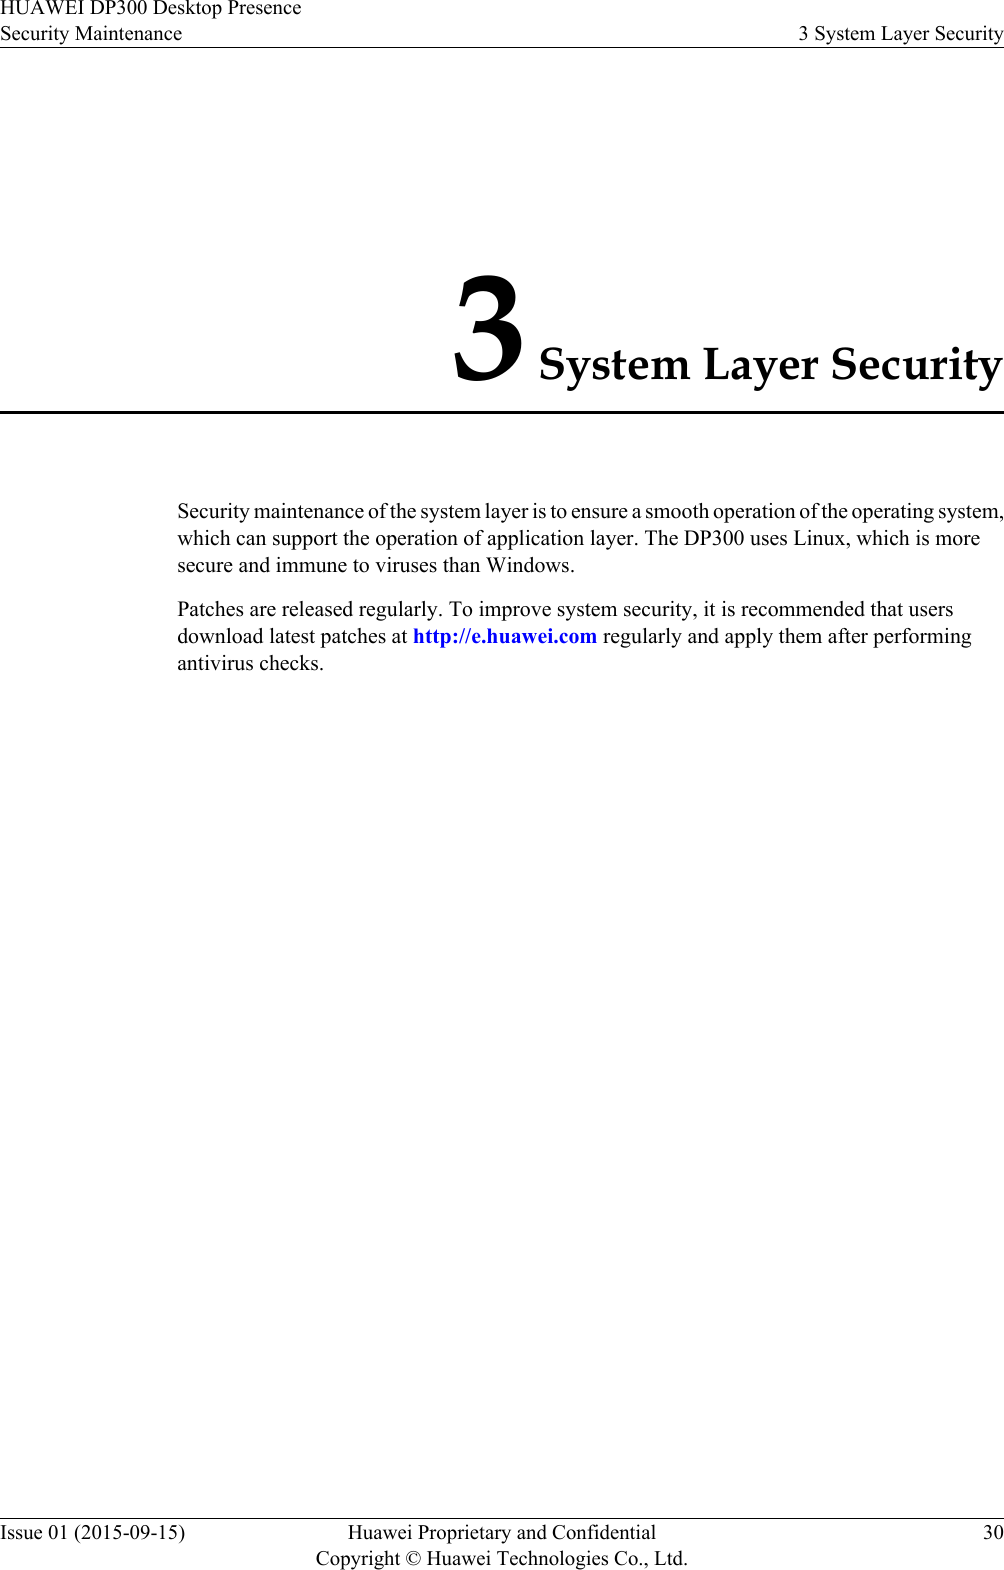 3 System Layer SecuritySecurity maintenance of the system layer is to ensure a smooth operation of the operating system,which can support the operation of application layer. The DP300 uses Linux, which is moresecure and immune to viruses than Windows.Patches are released regularly. To improve system security, it is recommended that usersdownload latest patches at http://e.huawei.com regularly and apply them after performingantivirus checks.HUAWEI DP300 Desktop PresenceSecurity Maintenance 3 System Layer SecurityIssue 01 (2015-09-15) Huawei Proprietary and ConfidentialCopyright © Huawei Technologies Co., Ltd.30